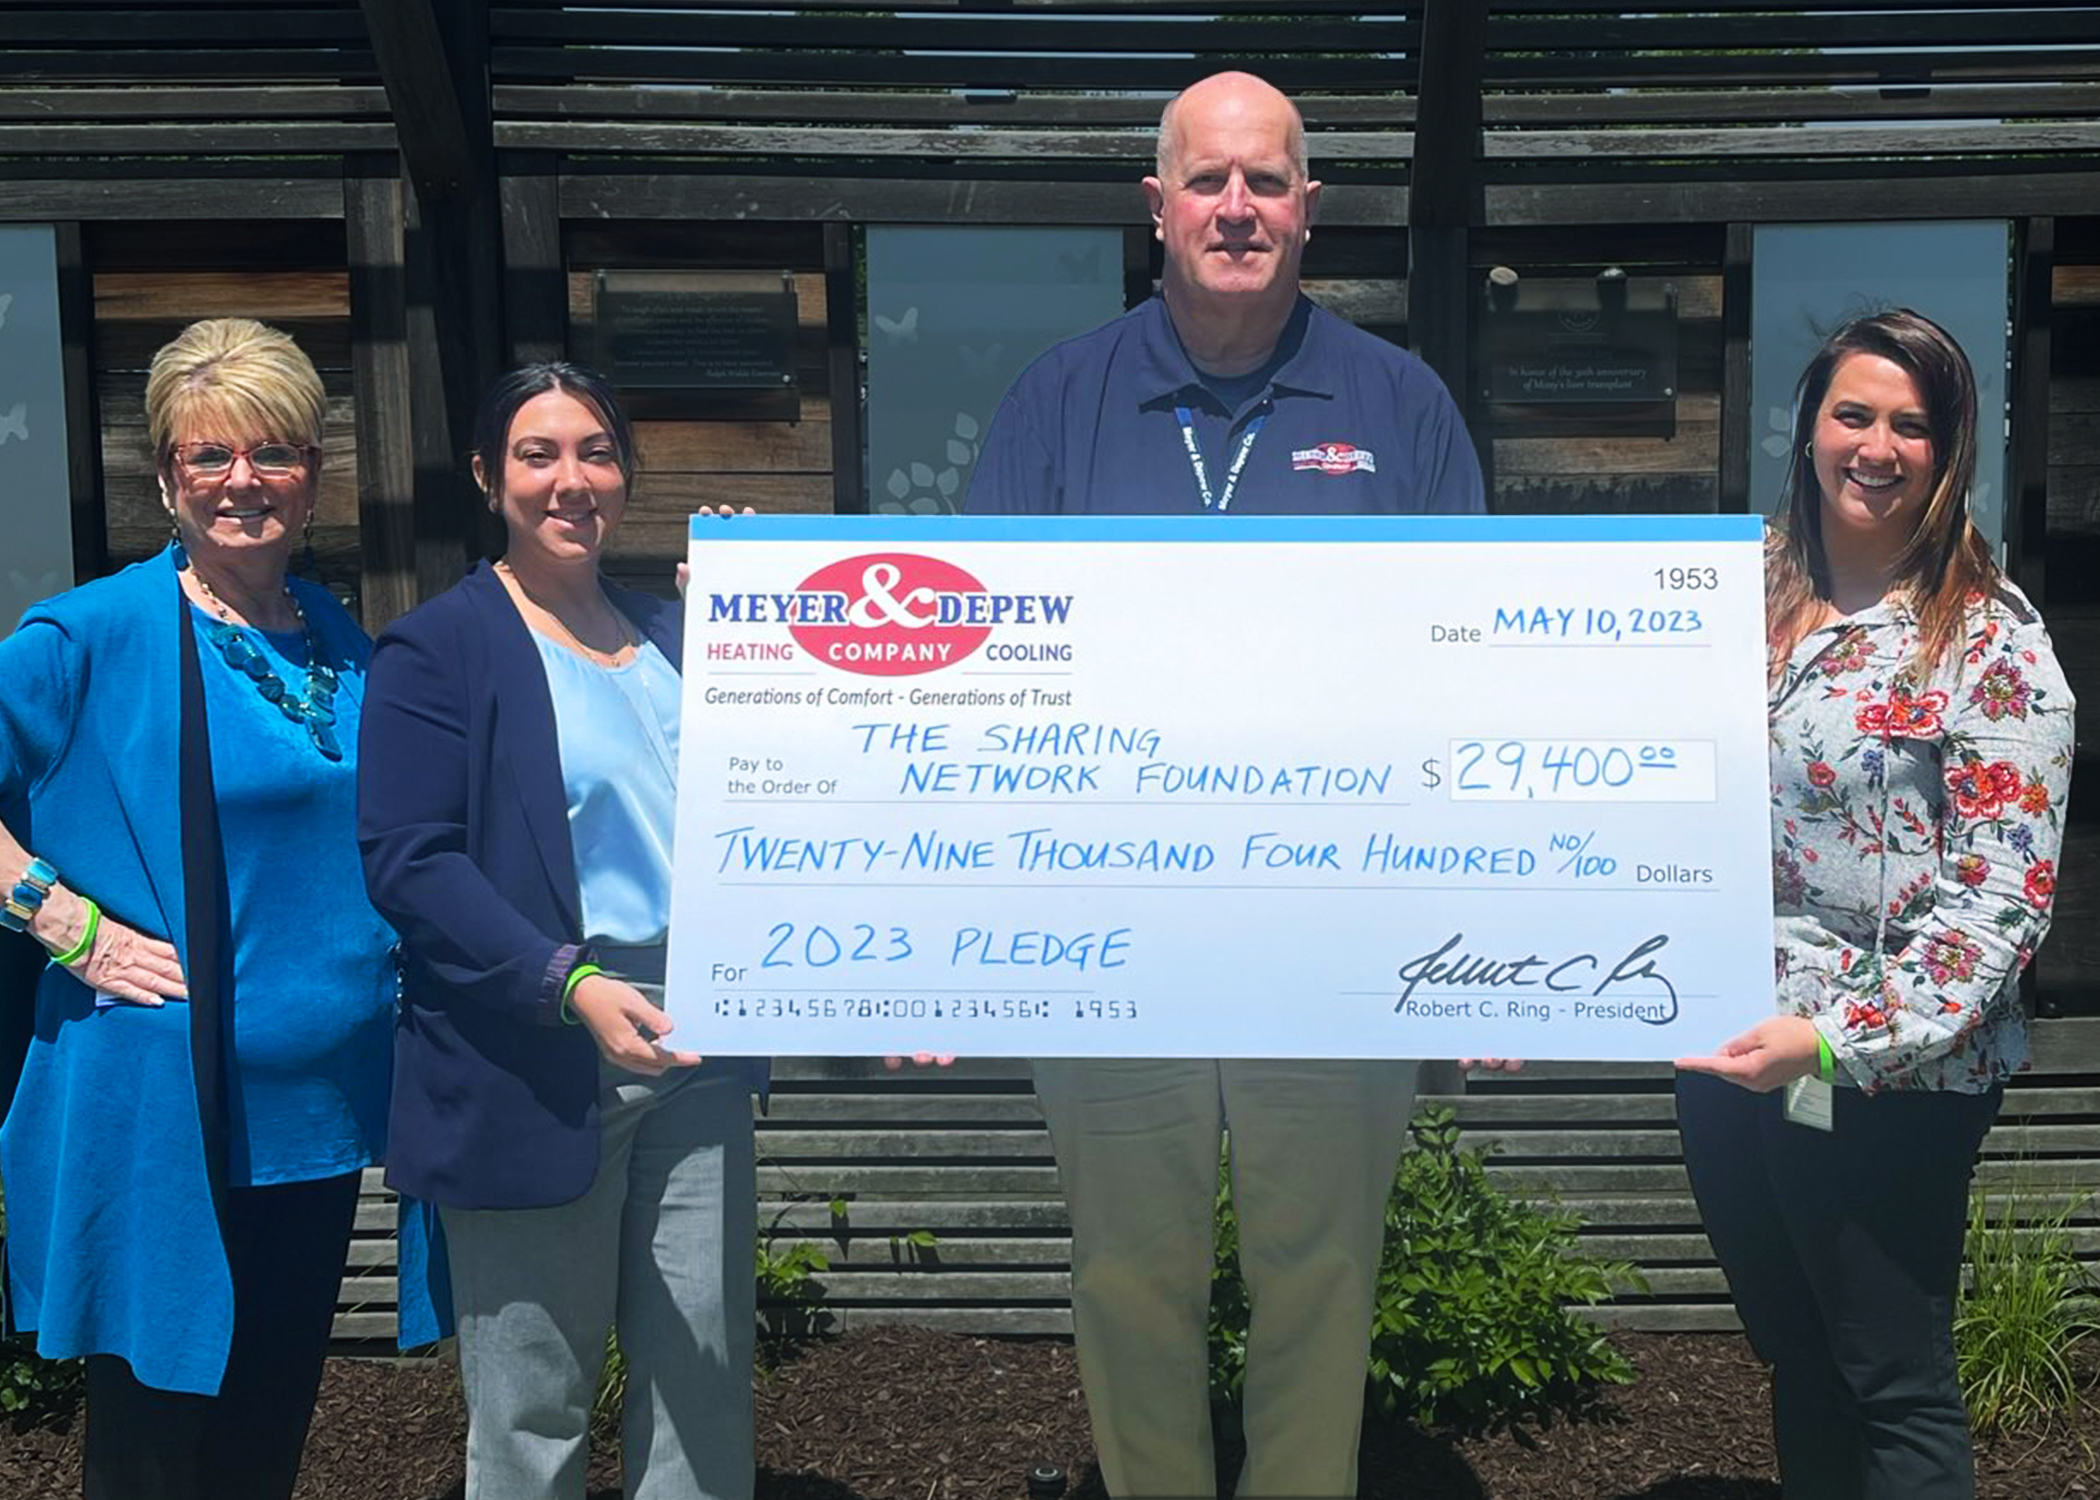 Meyer & Depew Company, a community-based HVAC company serving Central and Northern New Jersey since 1953, has presented the Sharing Network Foundation with a check for $29,400.